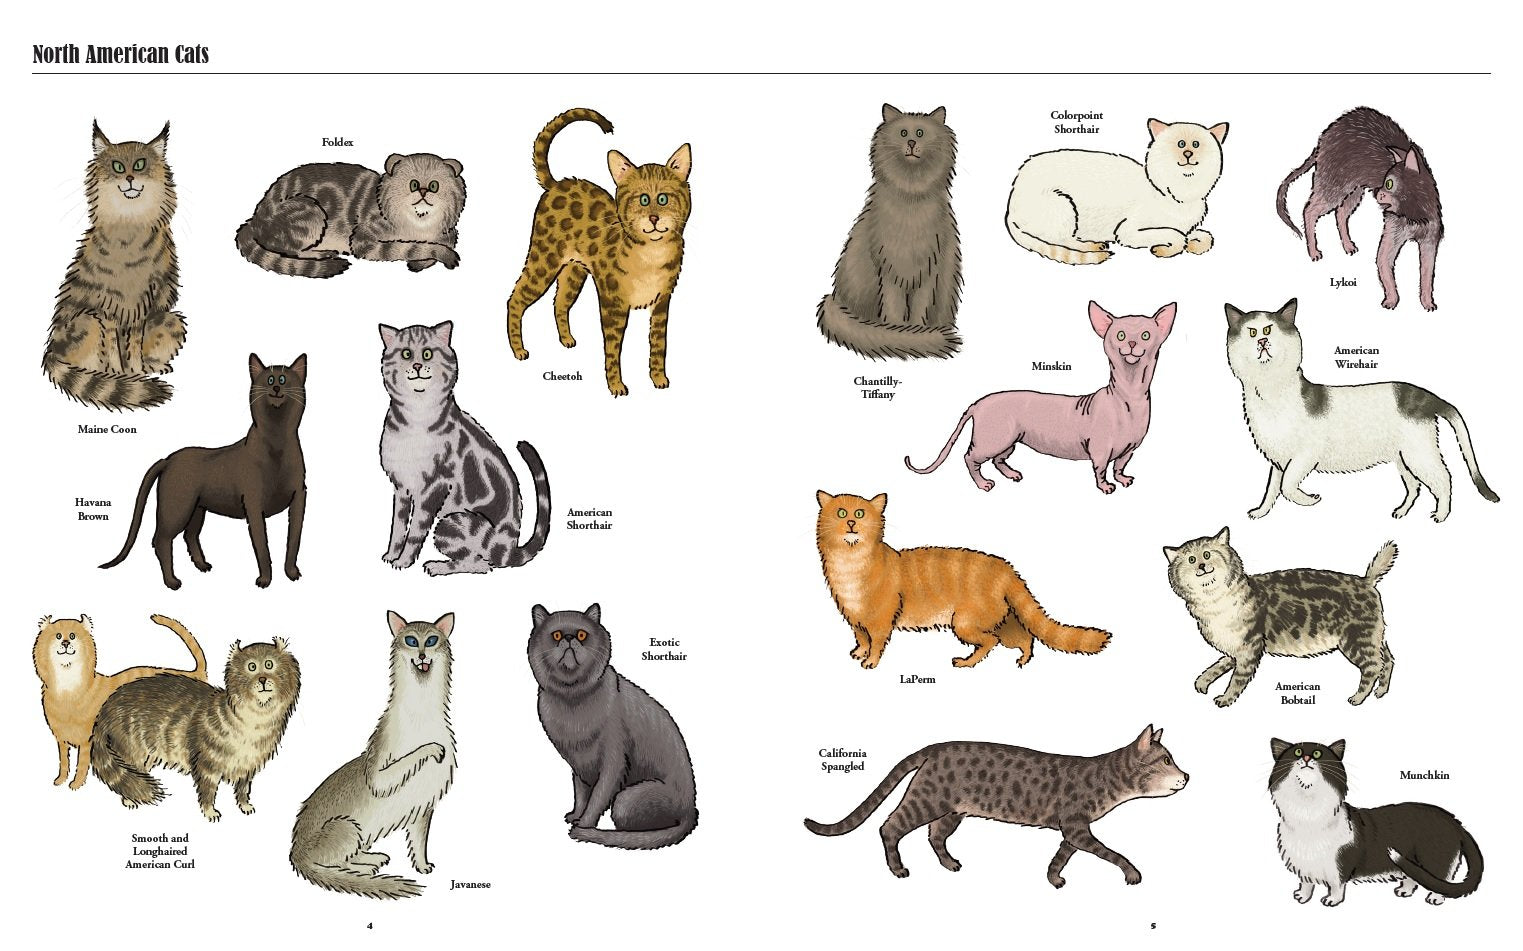 Big Cats, Little Cats: A Visual Guide to the World’s Cats